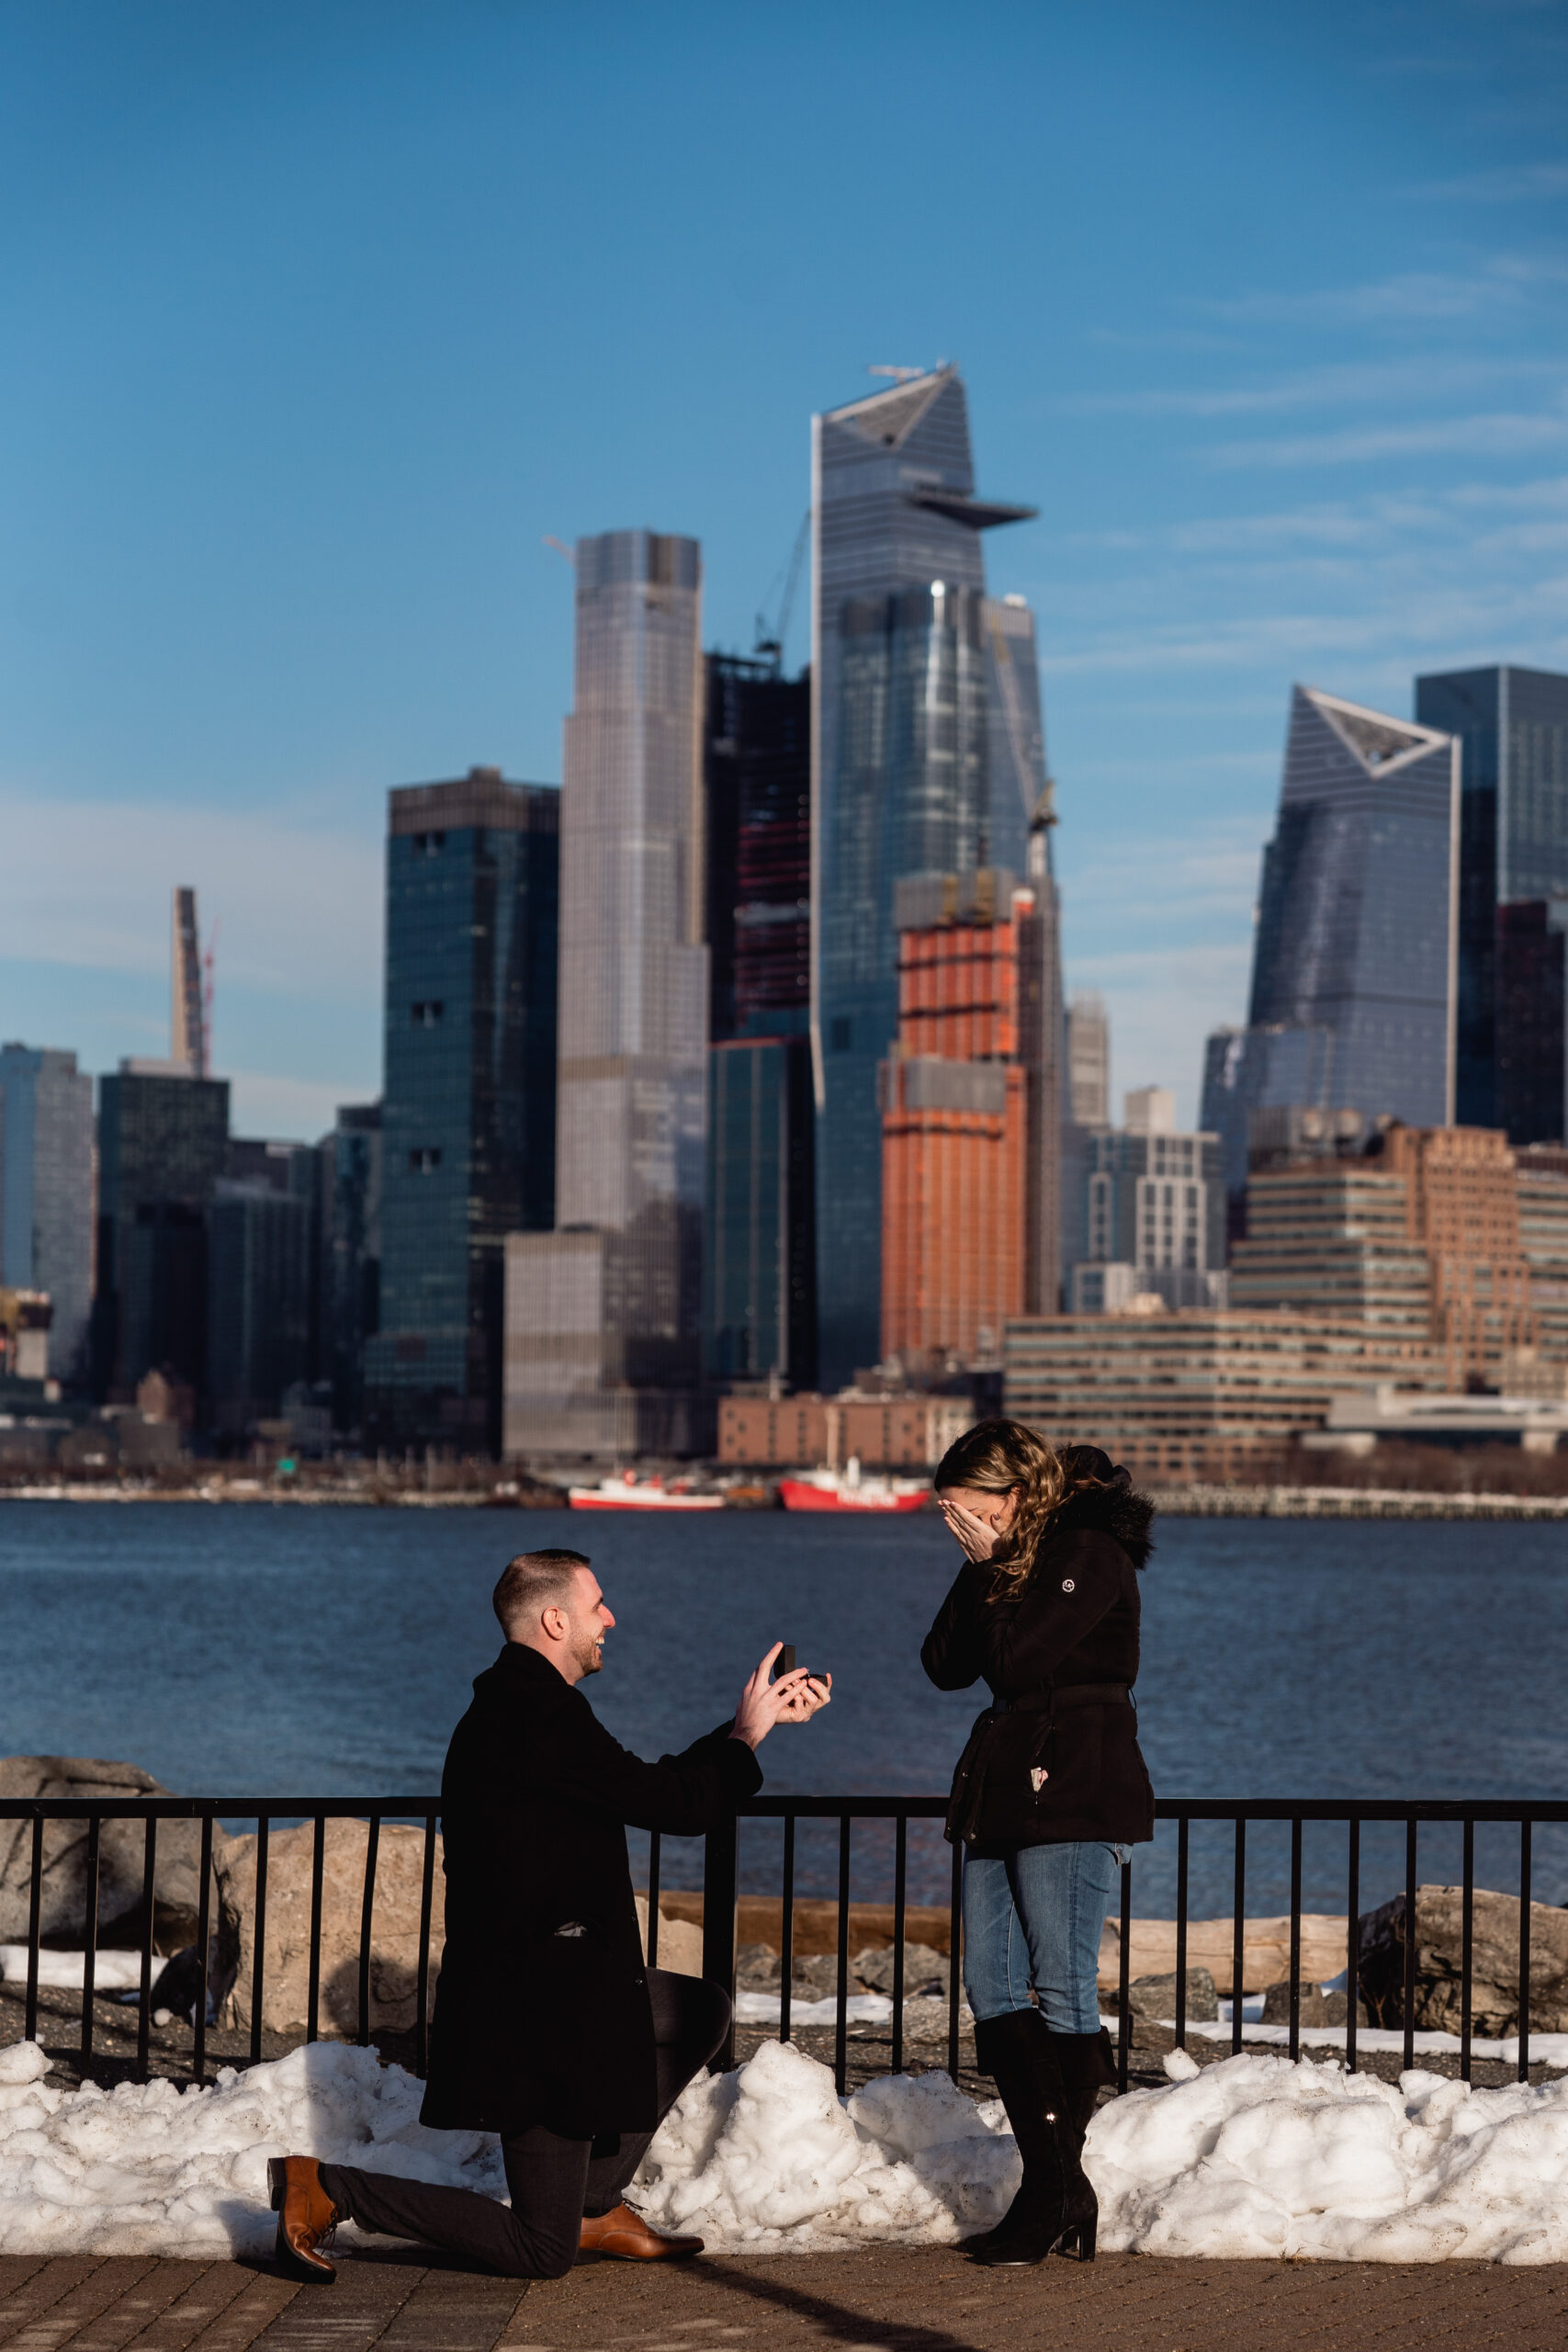 Hoboken New Jersey Proposal, Hoboken Proposal, Hoboken Proposal Photographer, Hoboken Photographer, New Jersey Photographer, NJ Engagement Photographer, NJ Winter Proposal, man kneeling down to propose to his fiancé as she covers her face in shock with the NYC skyline in the background and snow around them 